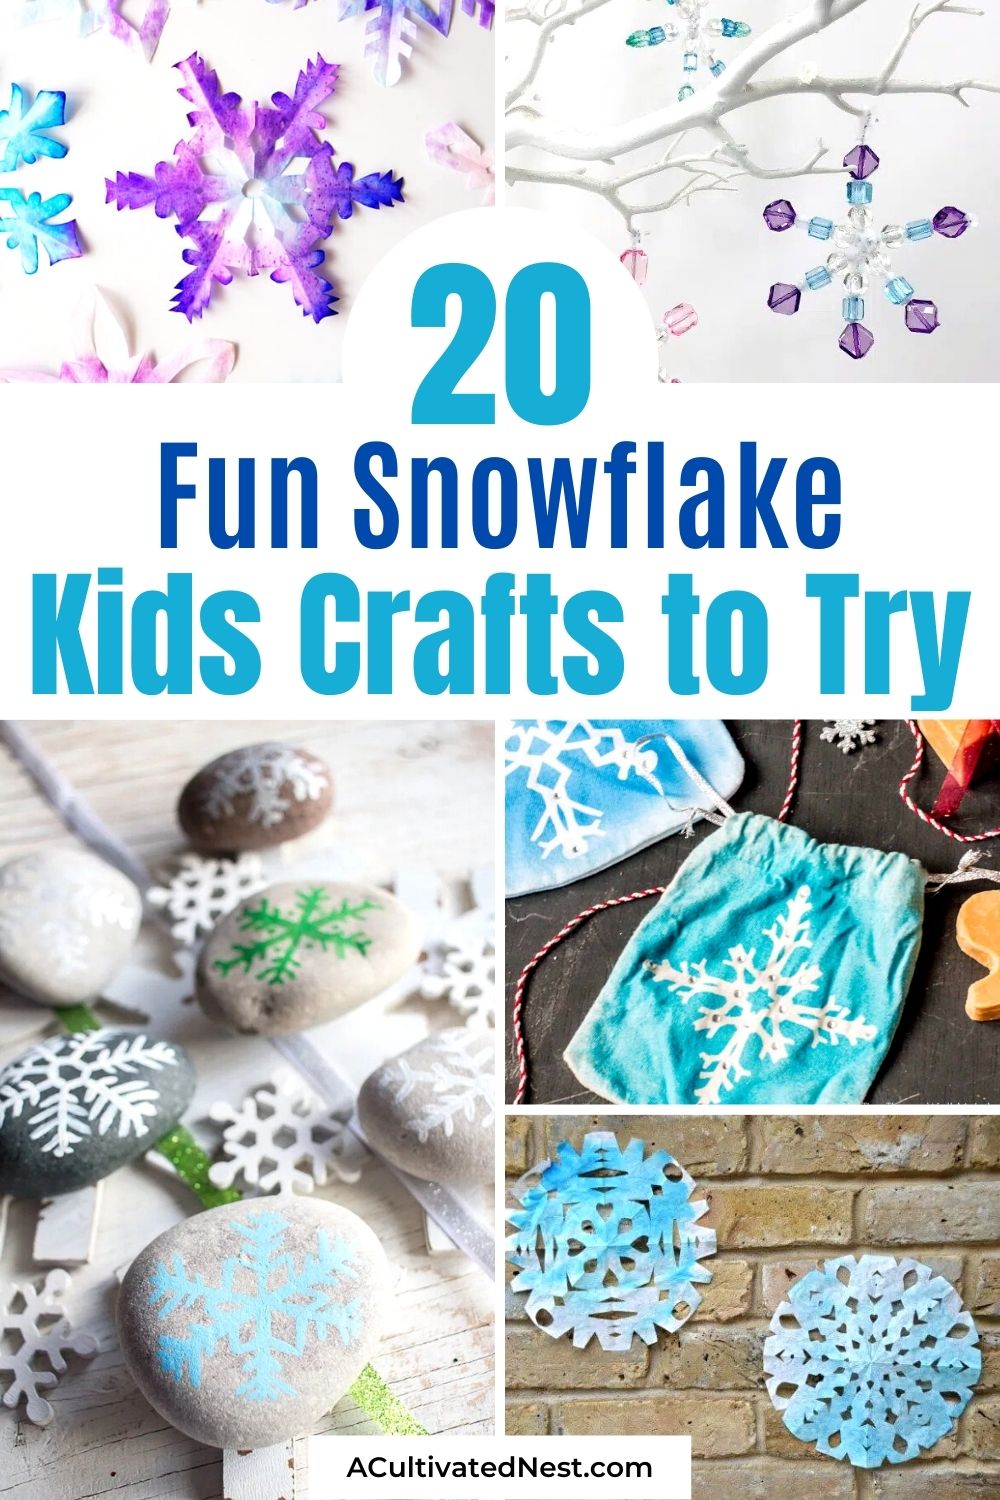 20 Simple Snowflake Kid Crafts to Try- A fun, budget-friendly way to keep your kids busy in the winter is with these simple snowflake kid crafts! There are so many fun snowflake crafts to try! | paper snowflake crafts, #craftsForKids #kidsActivities #snowflakeCrafts #kidsCrafts #ACultivatedNest